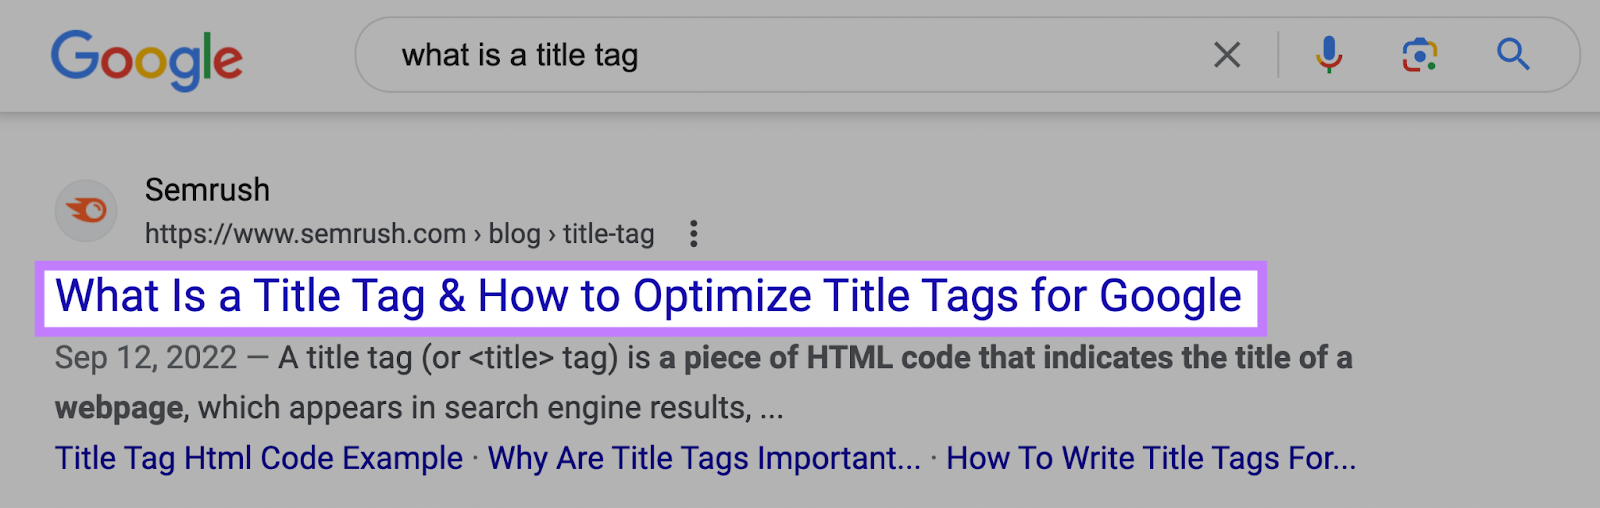 A title tag highlighted on Google SERP